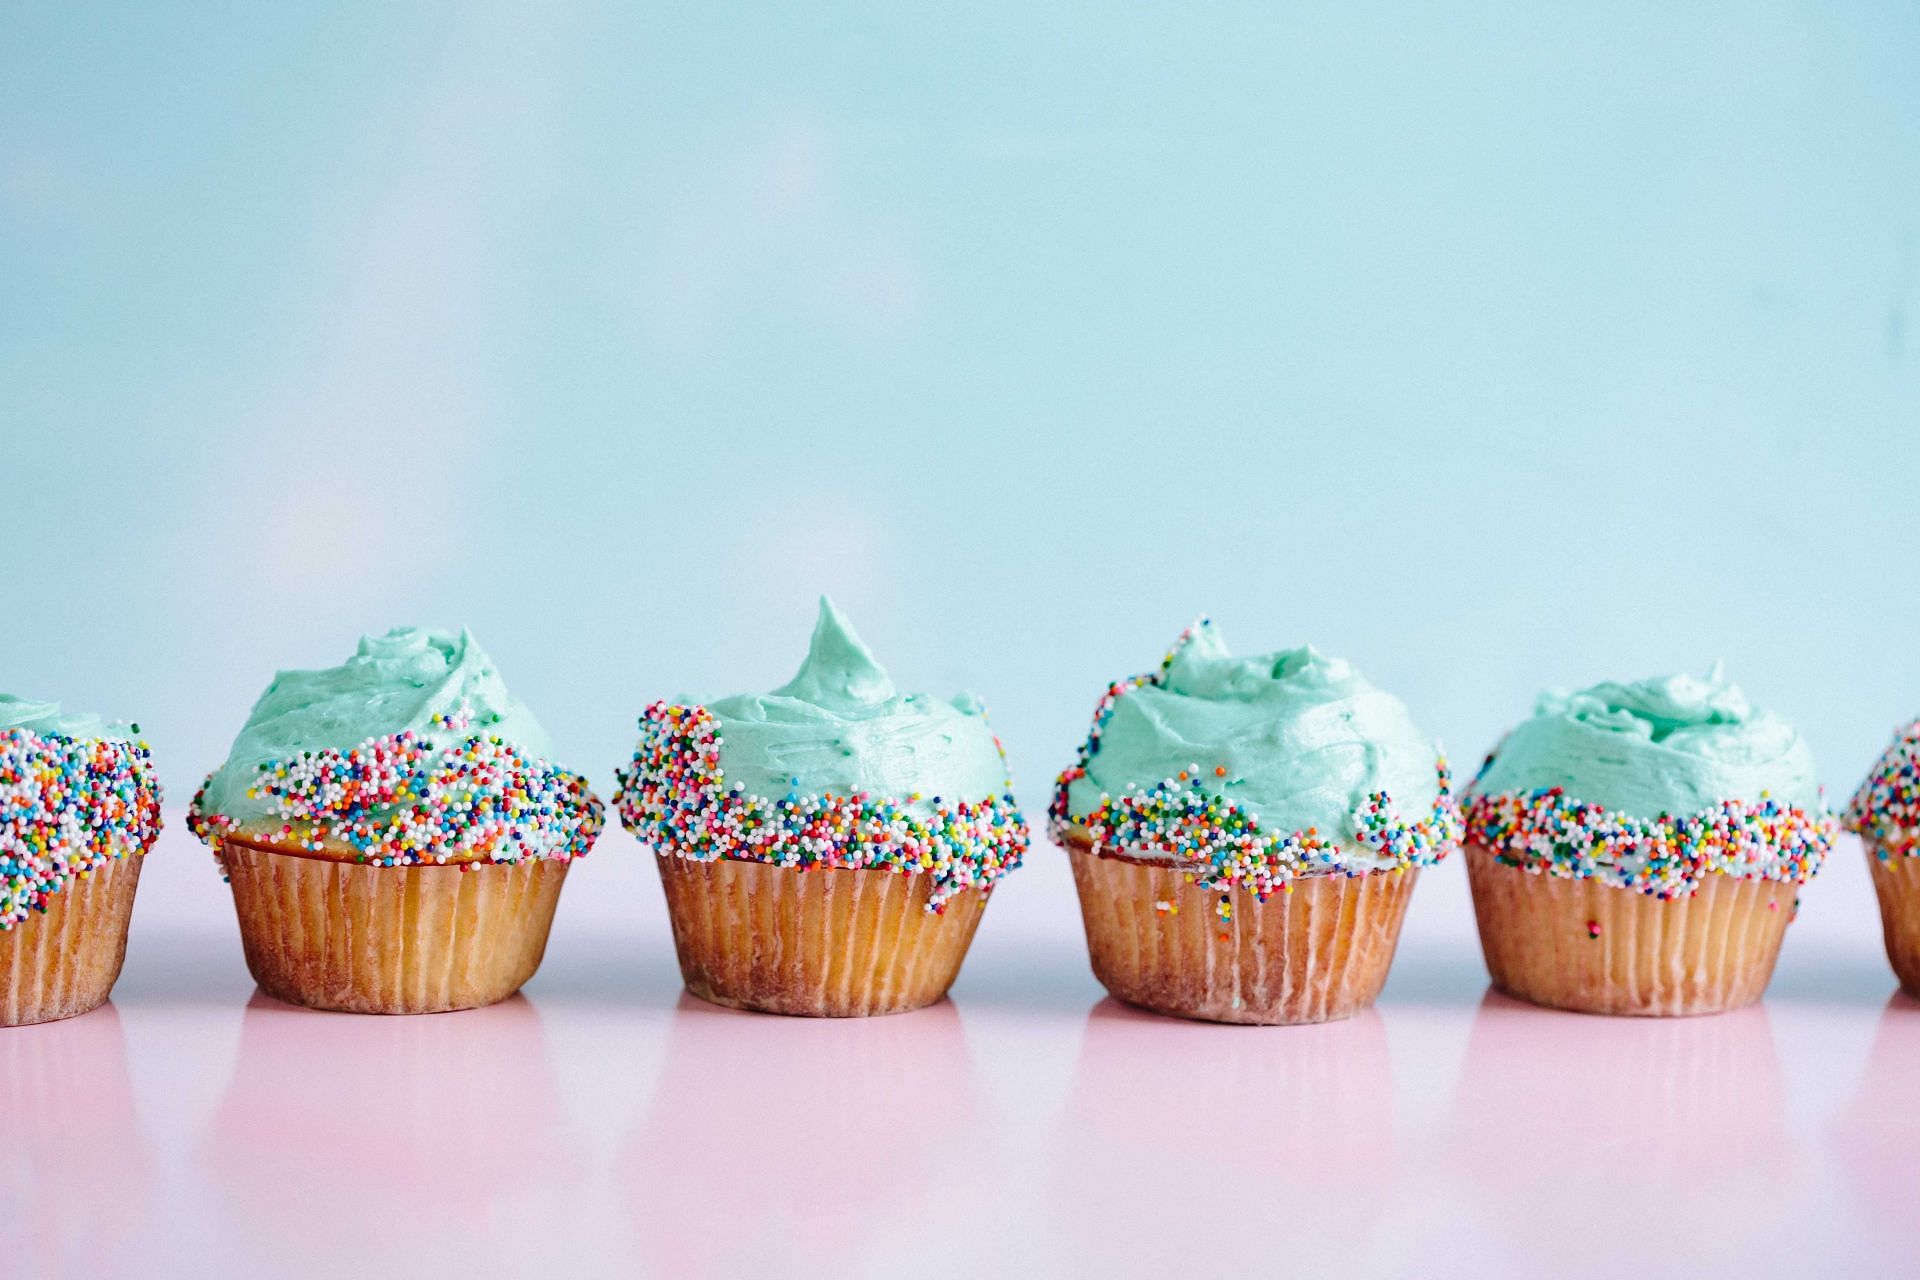 Cakes contain high amounts of sugar and fructose syrup. (Image via Unsplash/Brooke Lark)